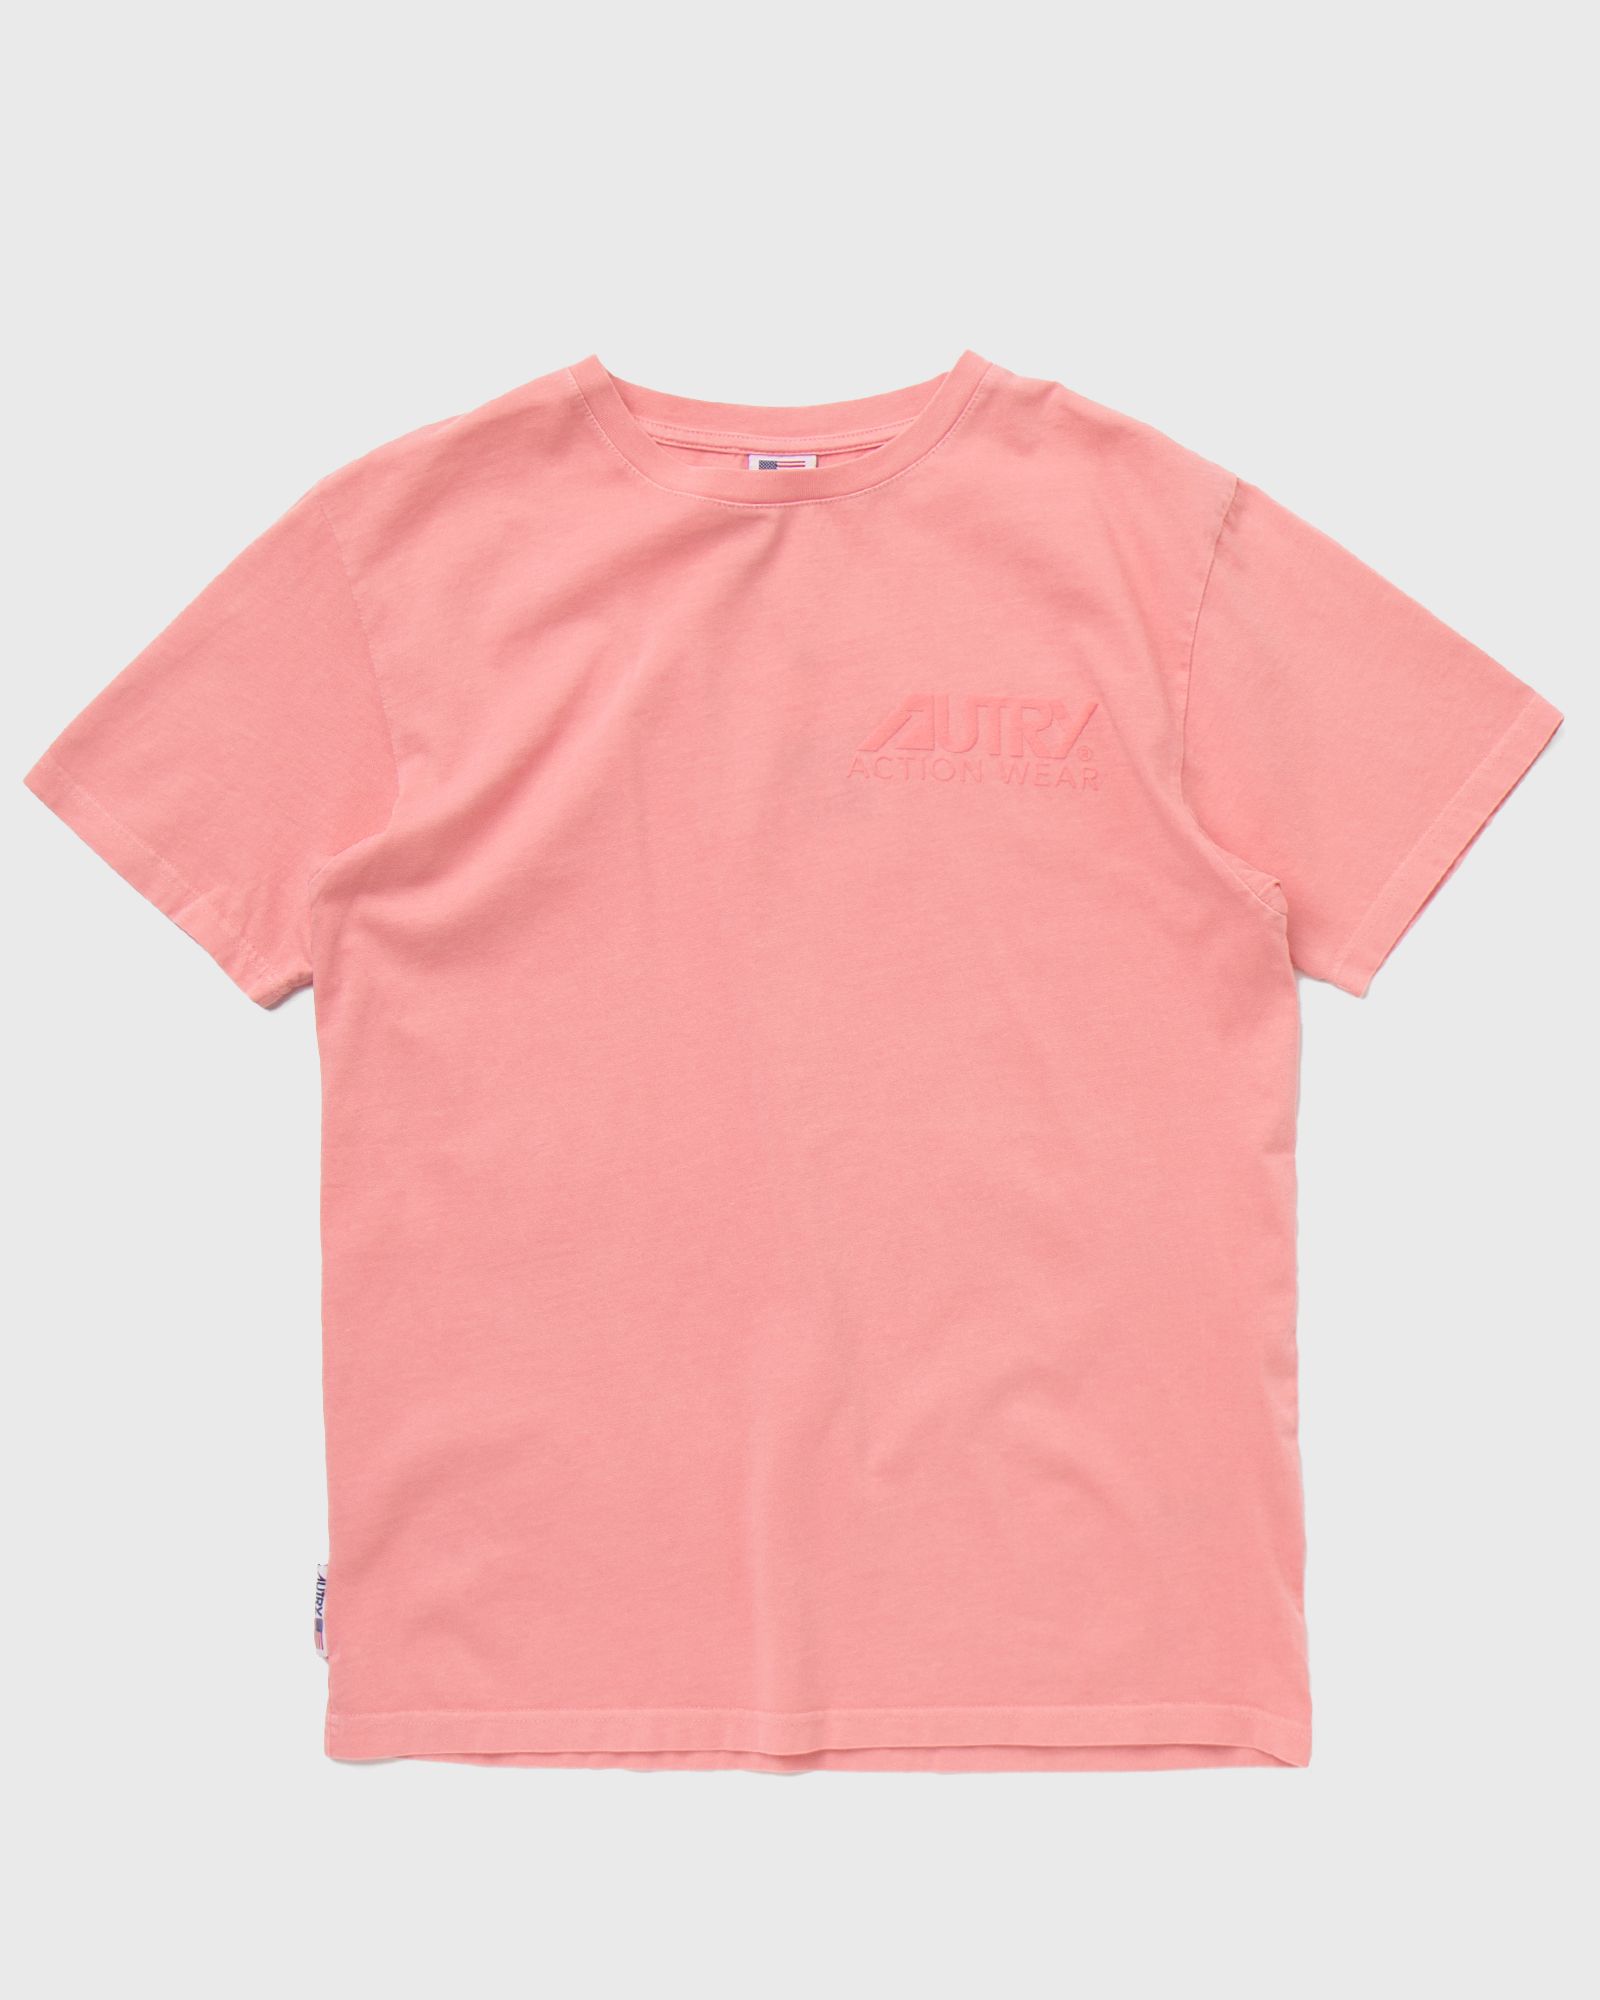 Autry Action Shoes - wmns match point tee women shortsleeves pink in größe:s